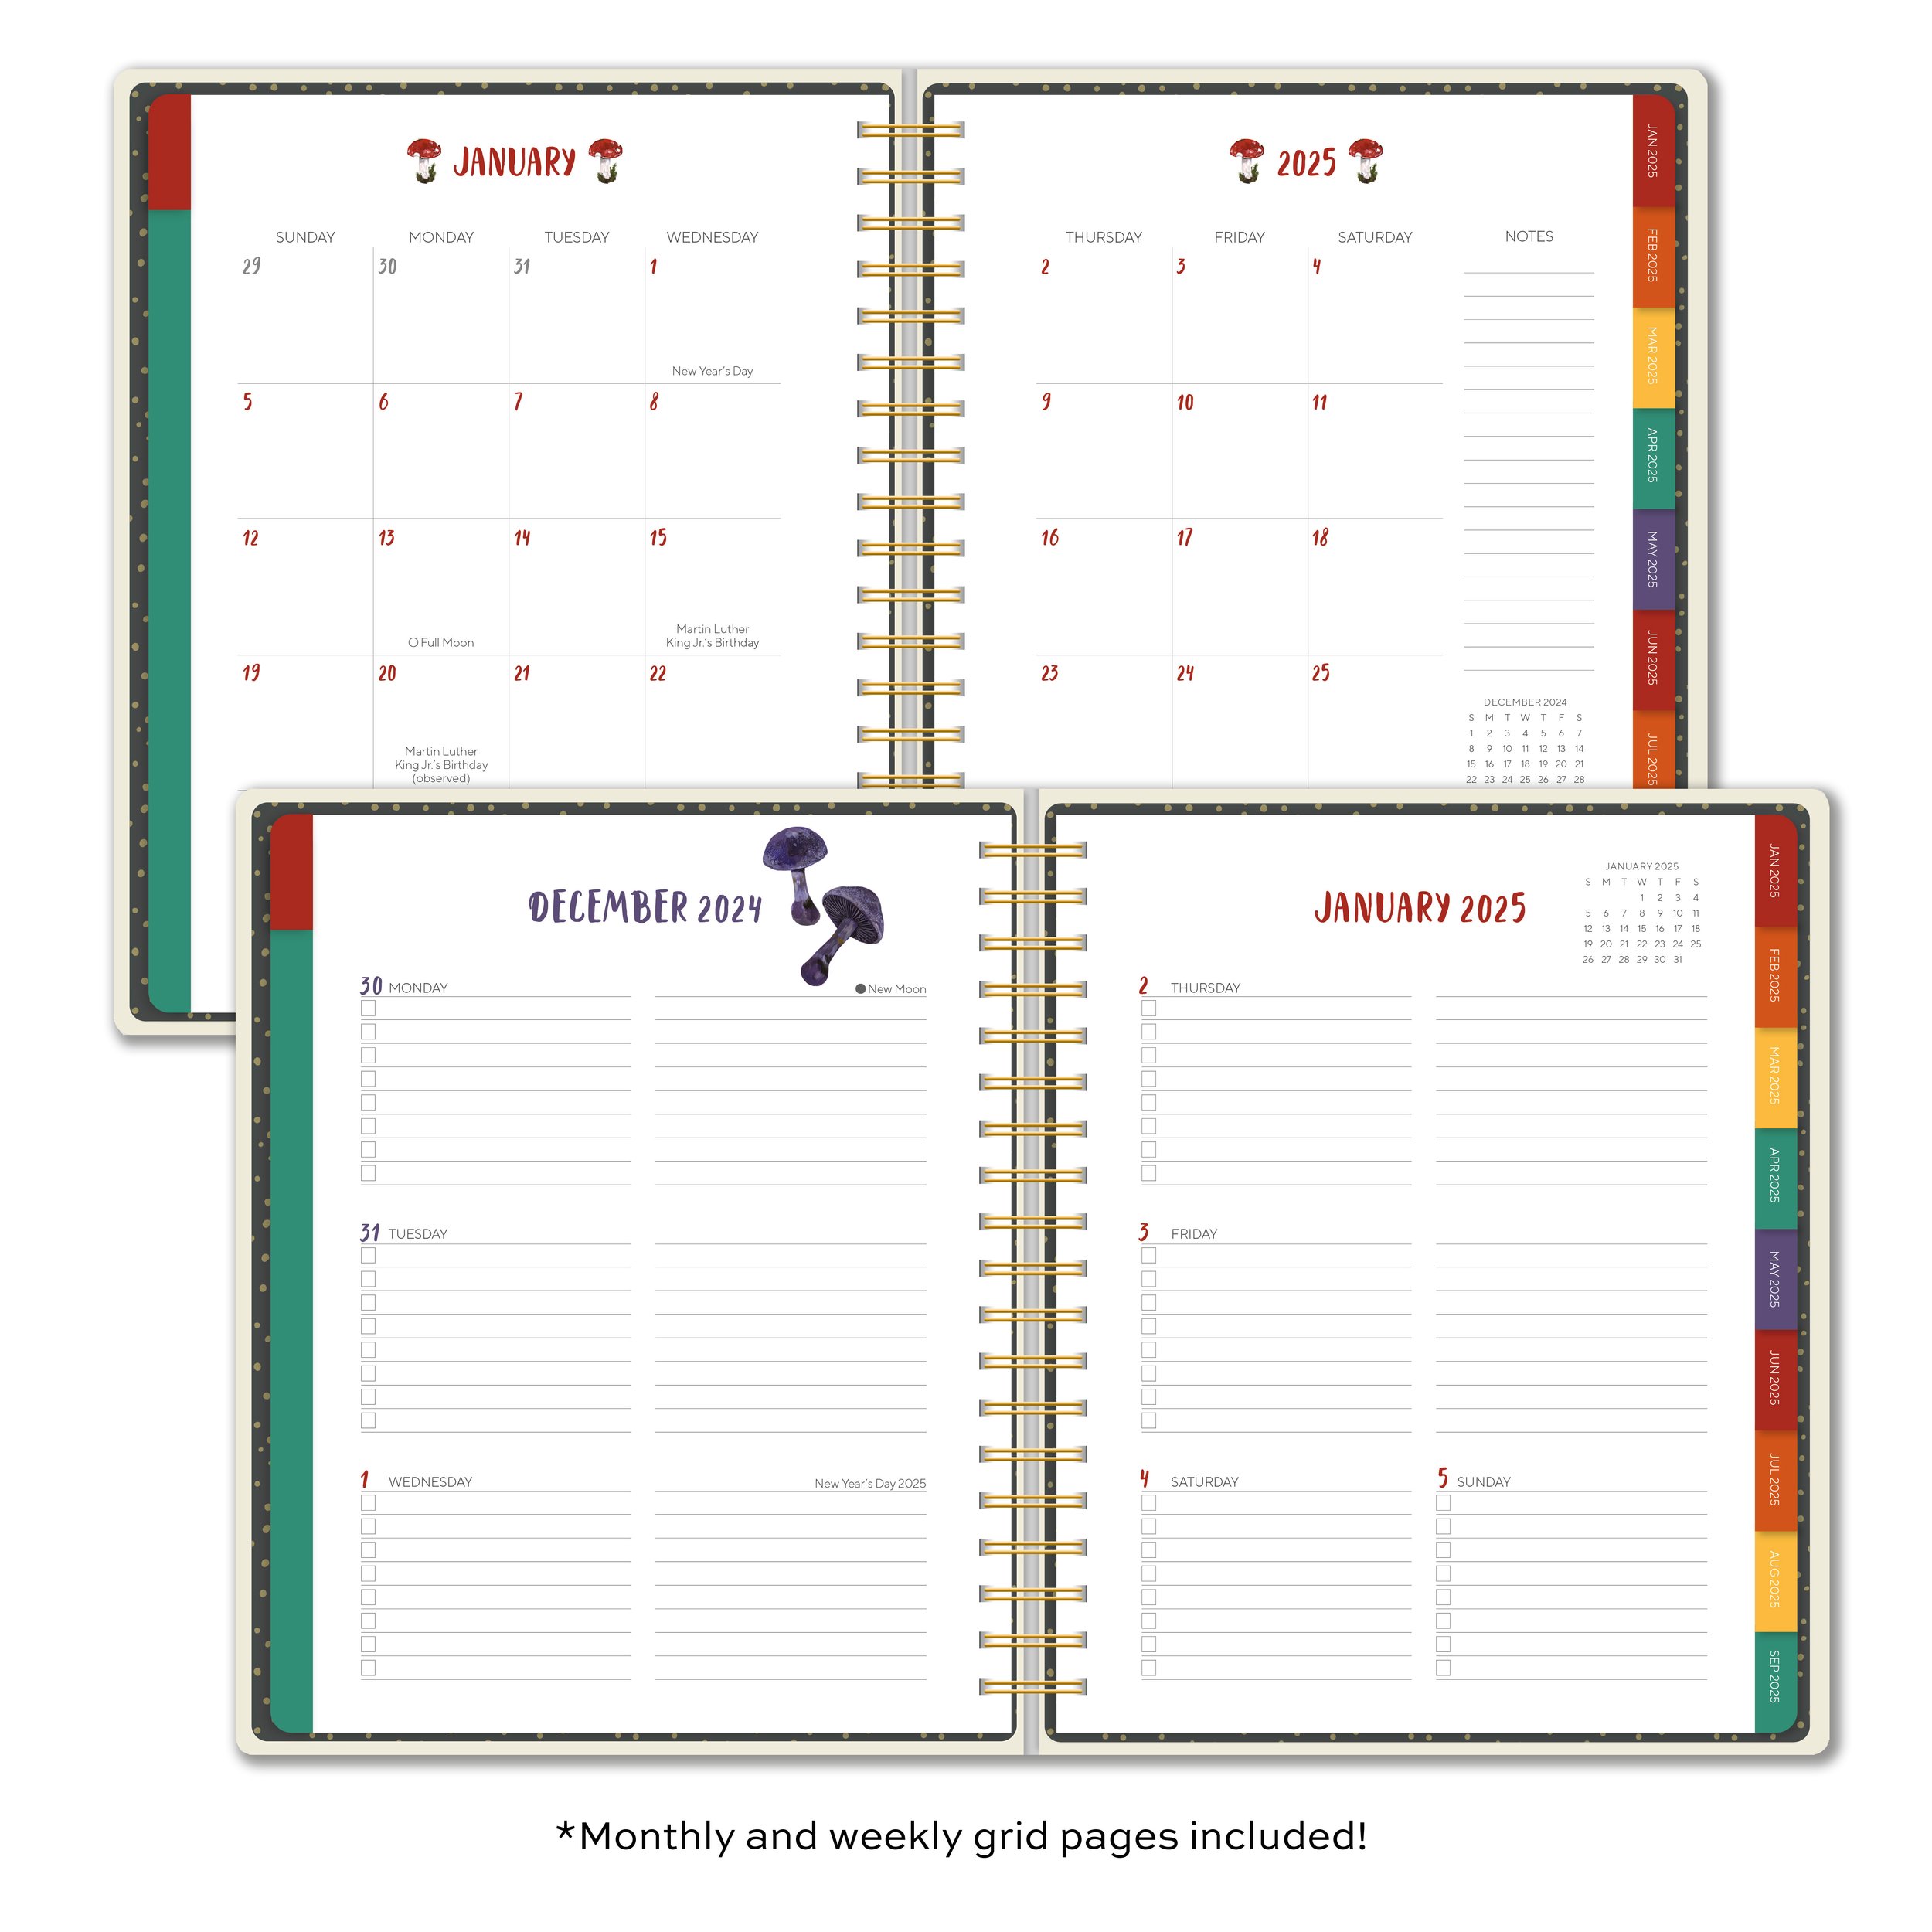 CHL-4210 Mushrooms Deluxe Planner Interior Pages.jpg